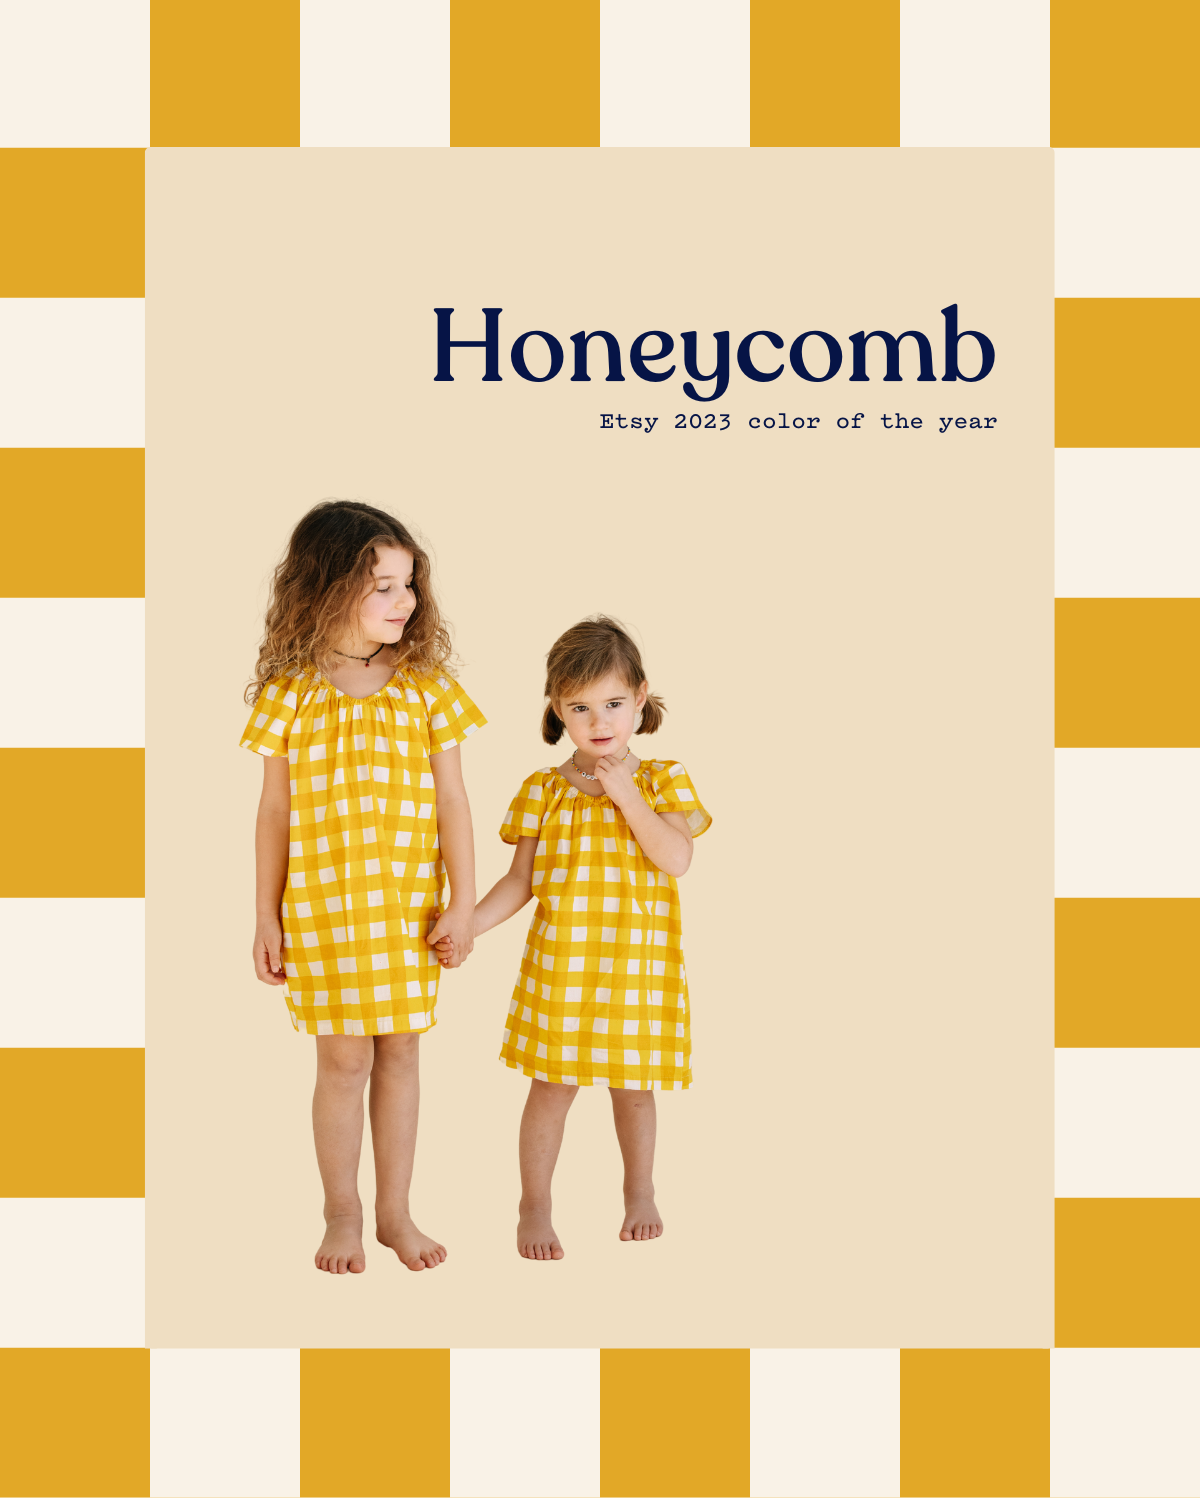 golden yellow sundresses in honeycomb, etsy color of the year 2023